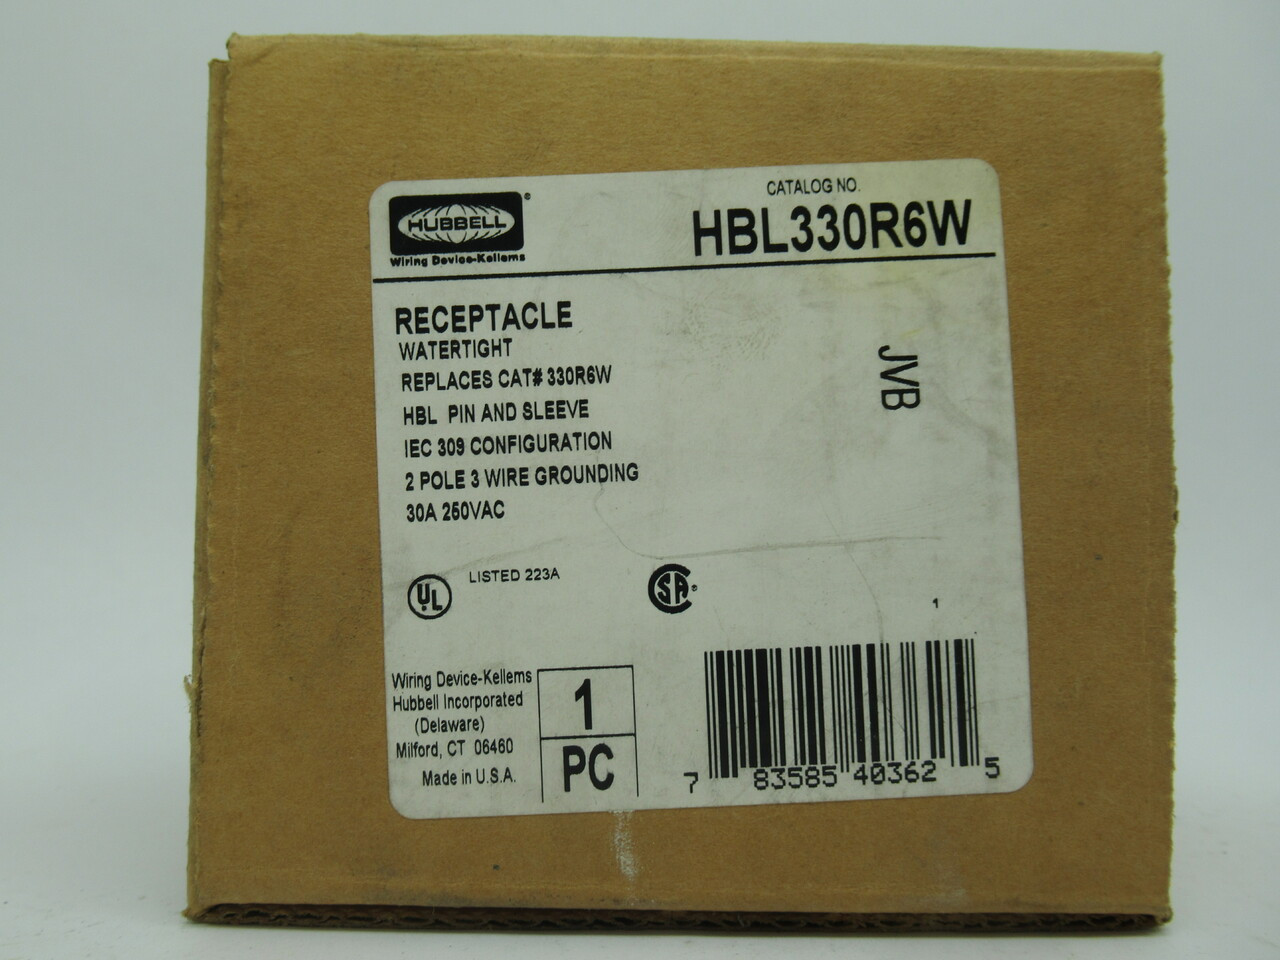 Hubbell HBL330R6W Watertight Receptacle 2Pole 3Wire 30A 250VAC NEW